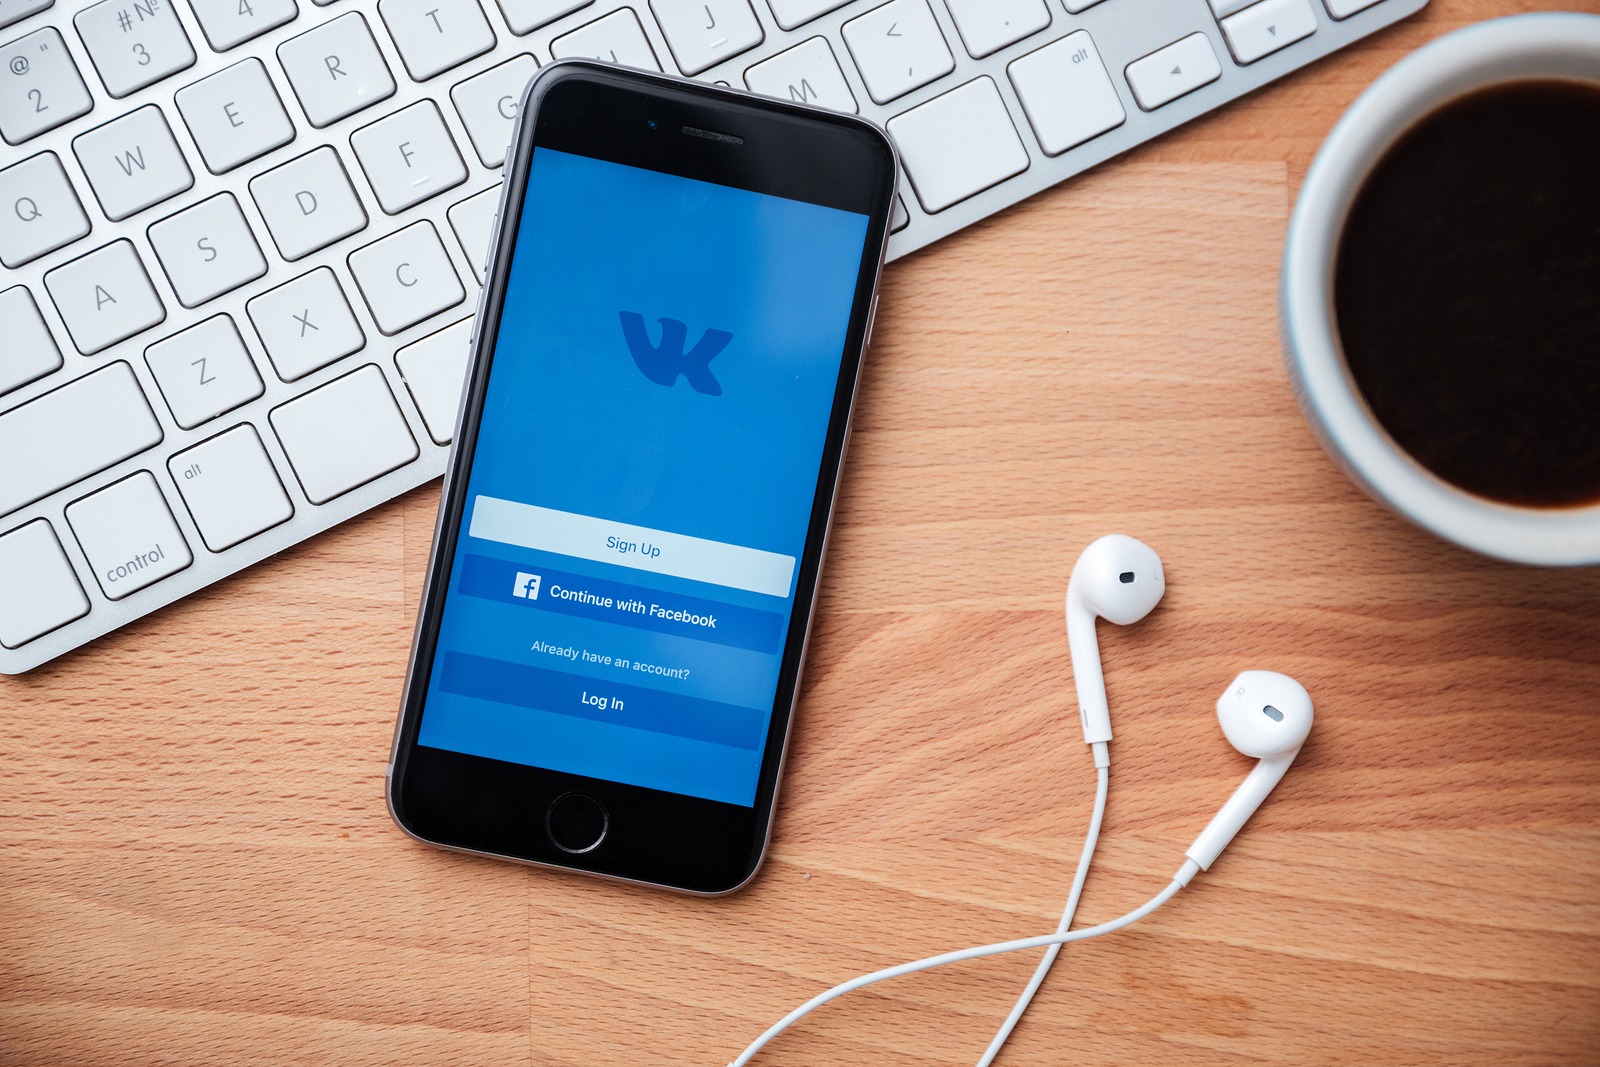 How to Add Your VK Account on Facebook Mobile App 